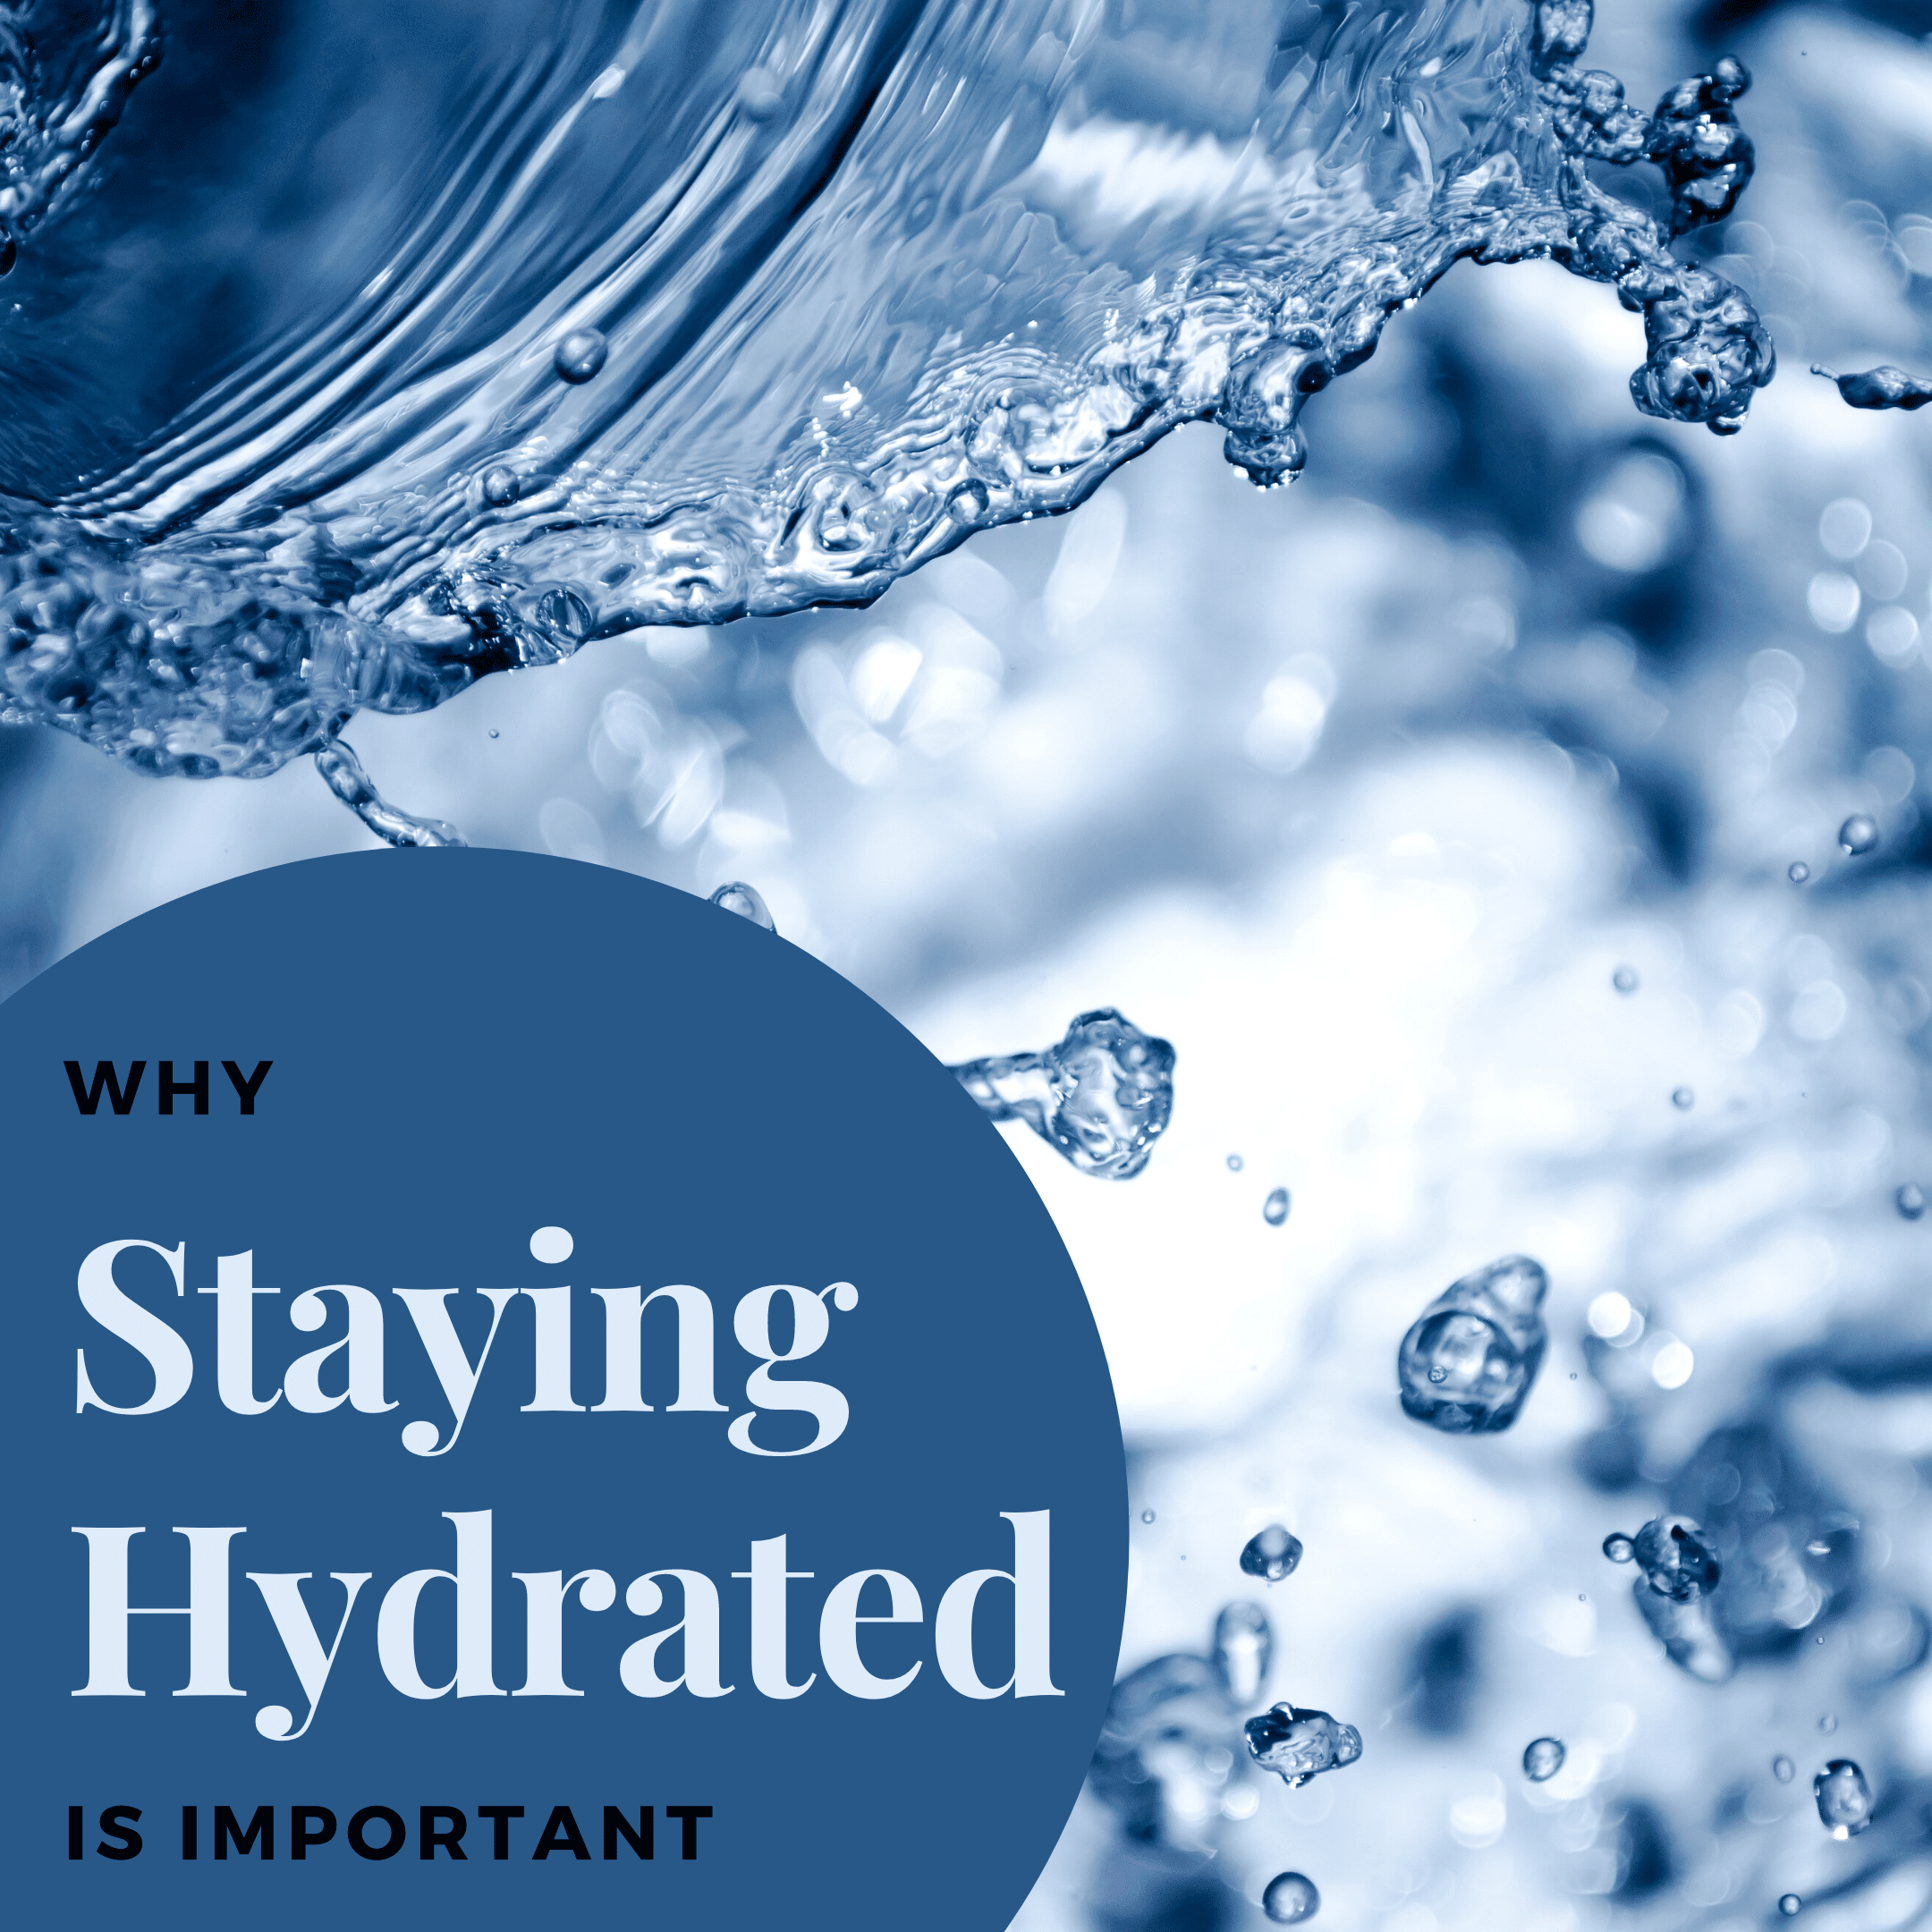 Why Staying Hydrated is Important